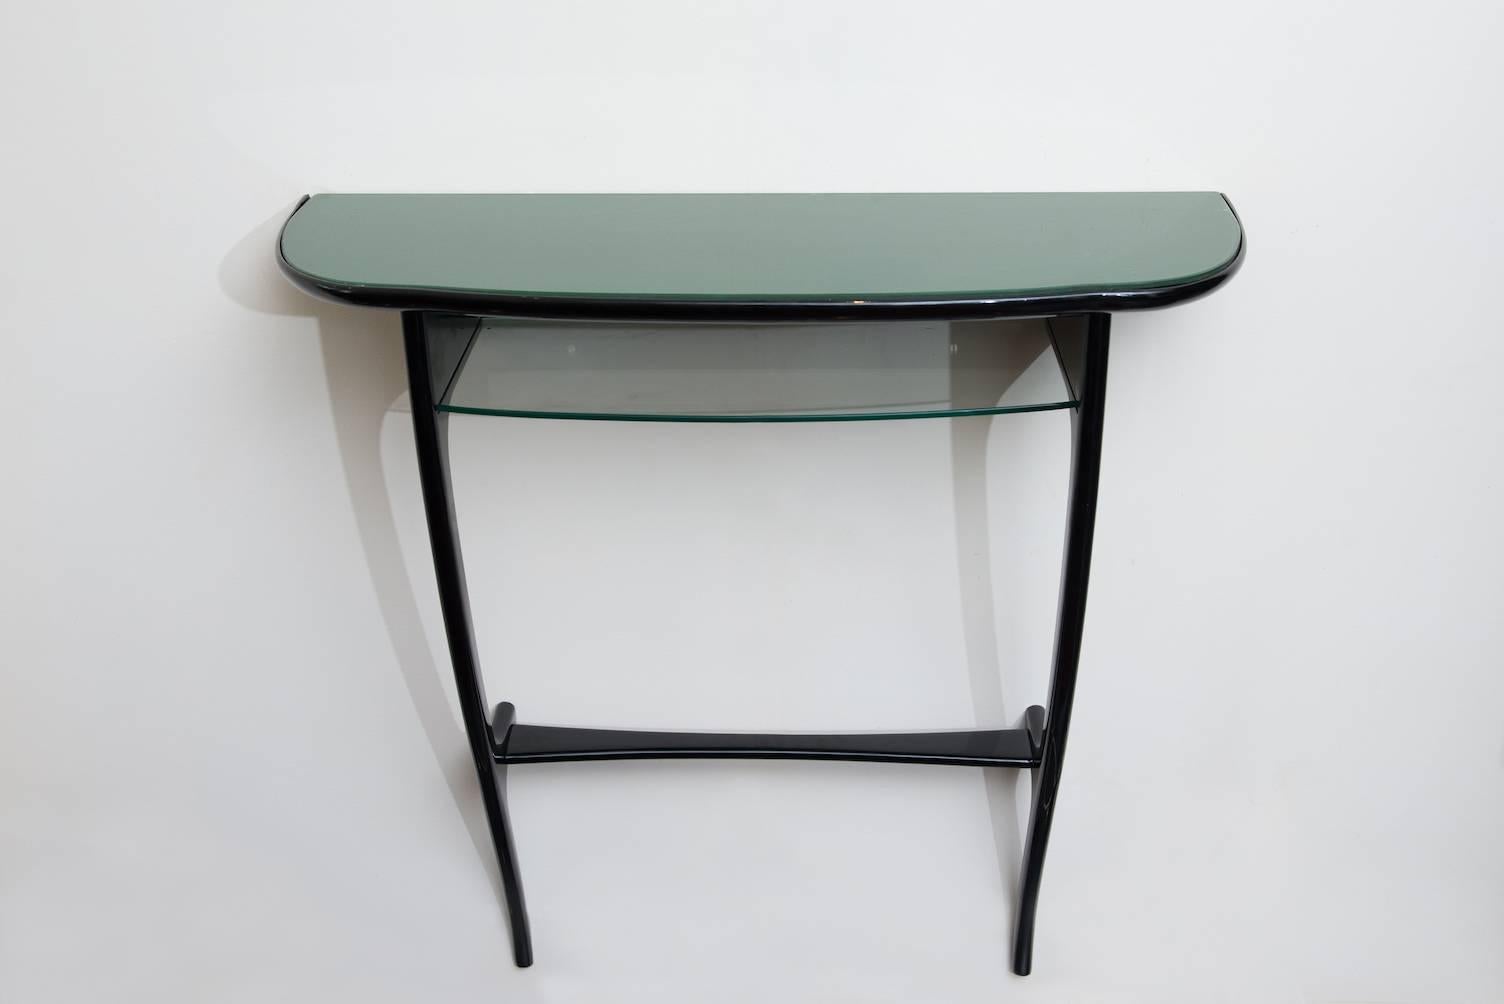 Small ebonized wood suspended console, with a glass shelf and a green lacquered glass top.